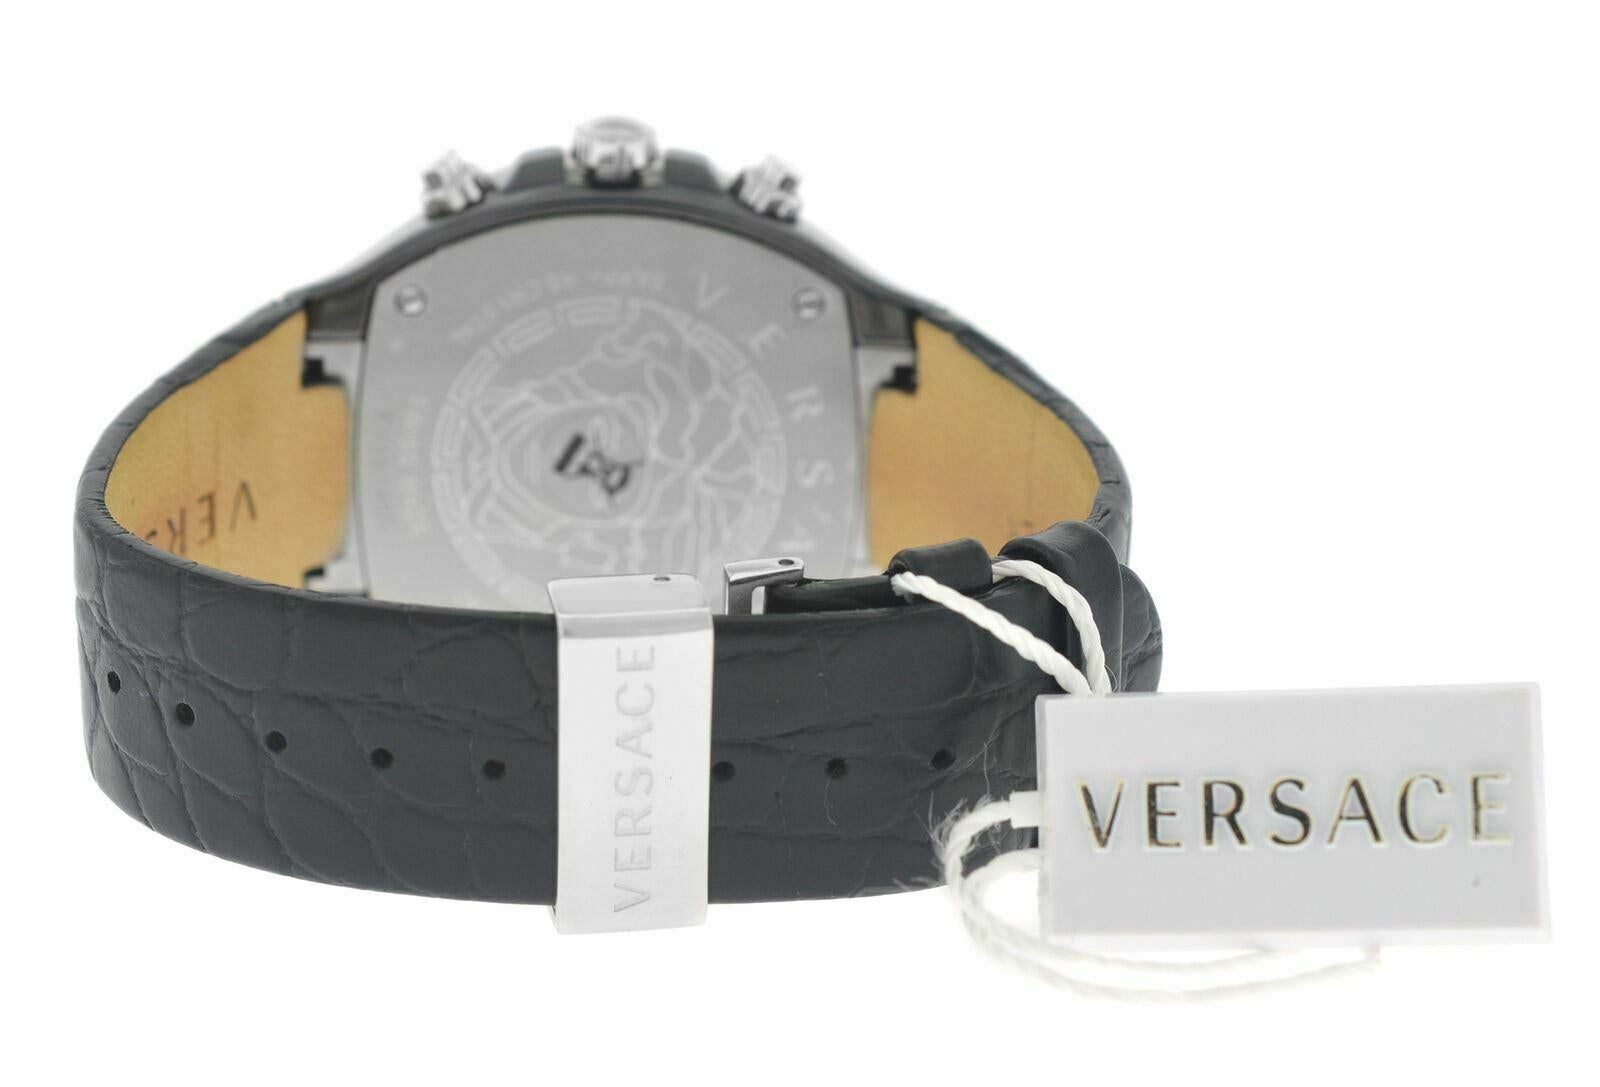 Brand	Versace
Model	DV One 28CCS9D008 S009
Gender	Mens
Condition	New
Movement	Swiss Quartz
Case Material	Ceramic & steel
Bracelet / Strap Material	
Genuine leather

Clasp / Buckle Material	
Stainless Steel

Clasp Type	Butterfly deployment
Bracelet /